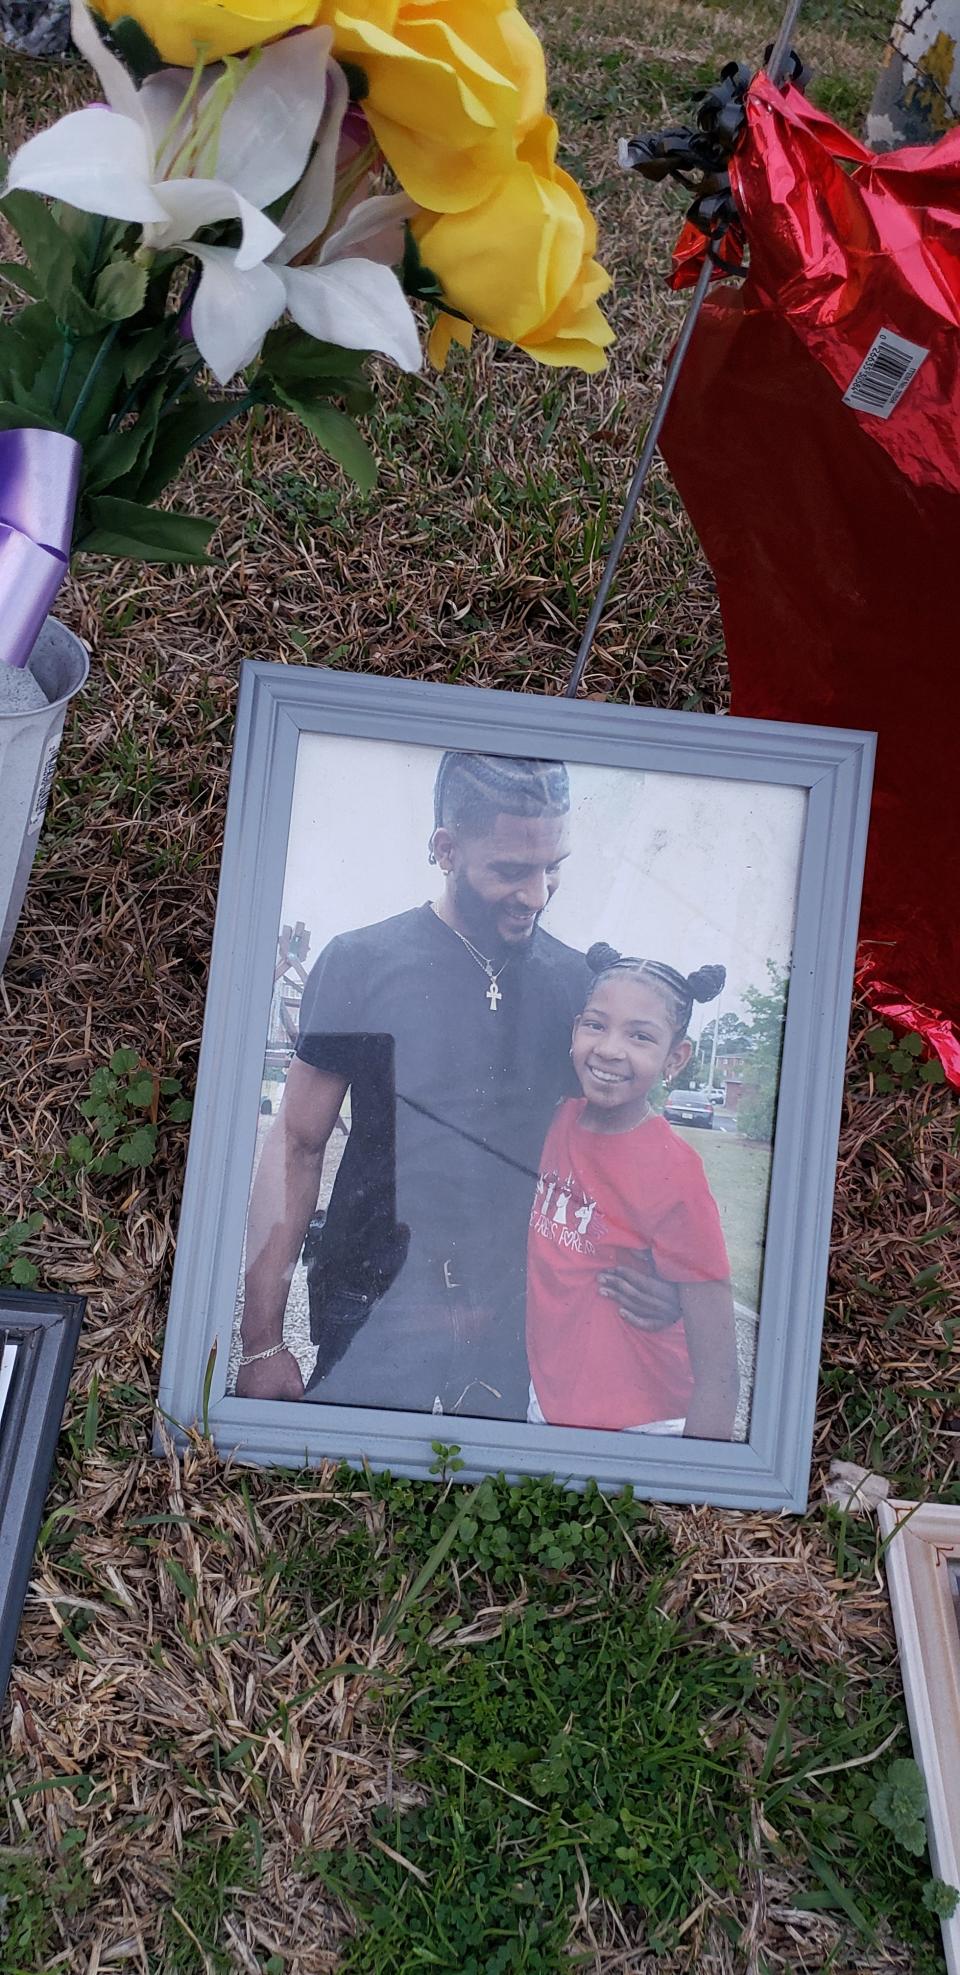 A memorial for Stephen “Trey” Addison at Cliffdale and Skibo roads, in front of Enterprise Rent-A-Car, is shown on March 7, 2022. Addison was shot to death in a road rage encounter on Jan. 3, 2022.